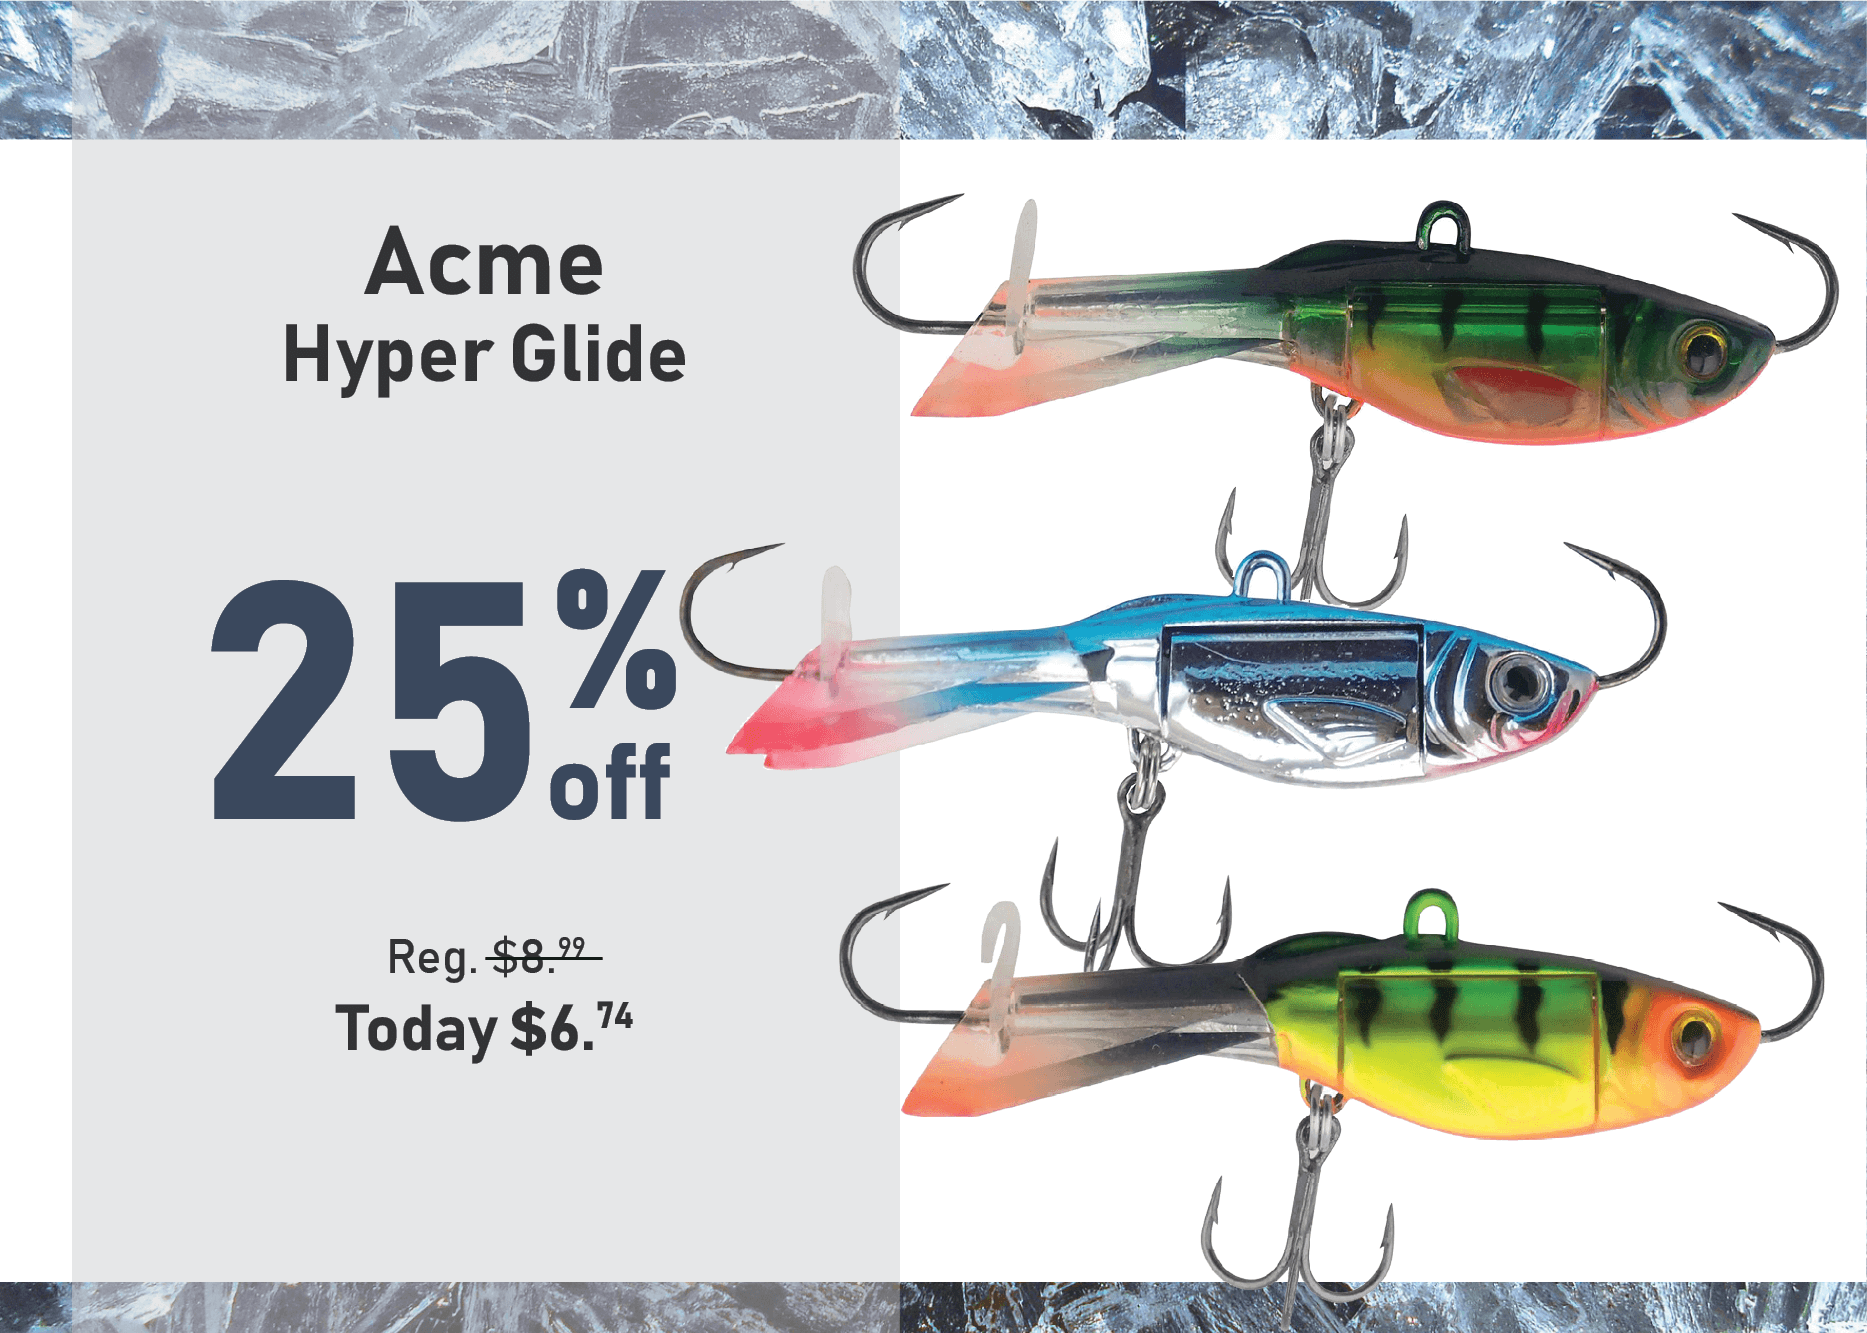 Save 25% on the Acme Hyper Glide